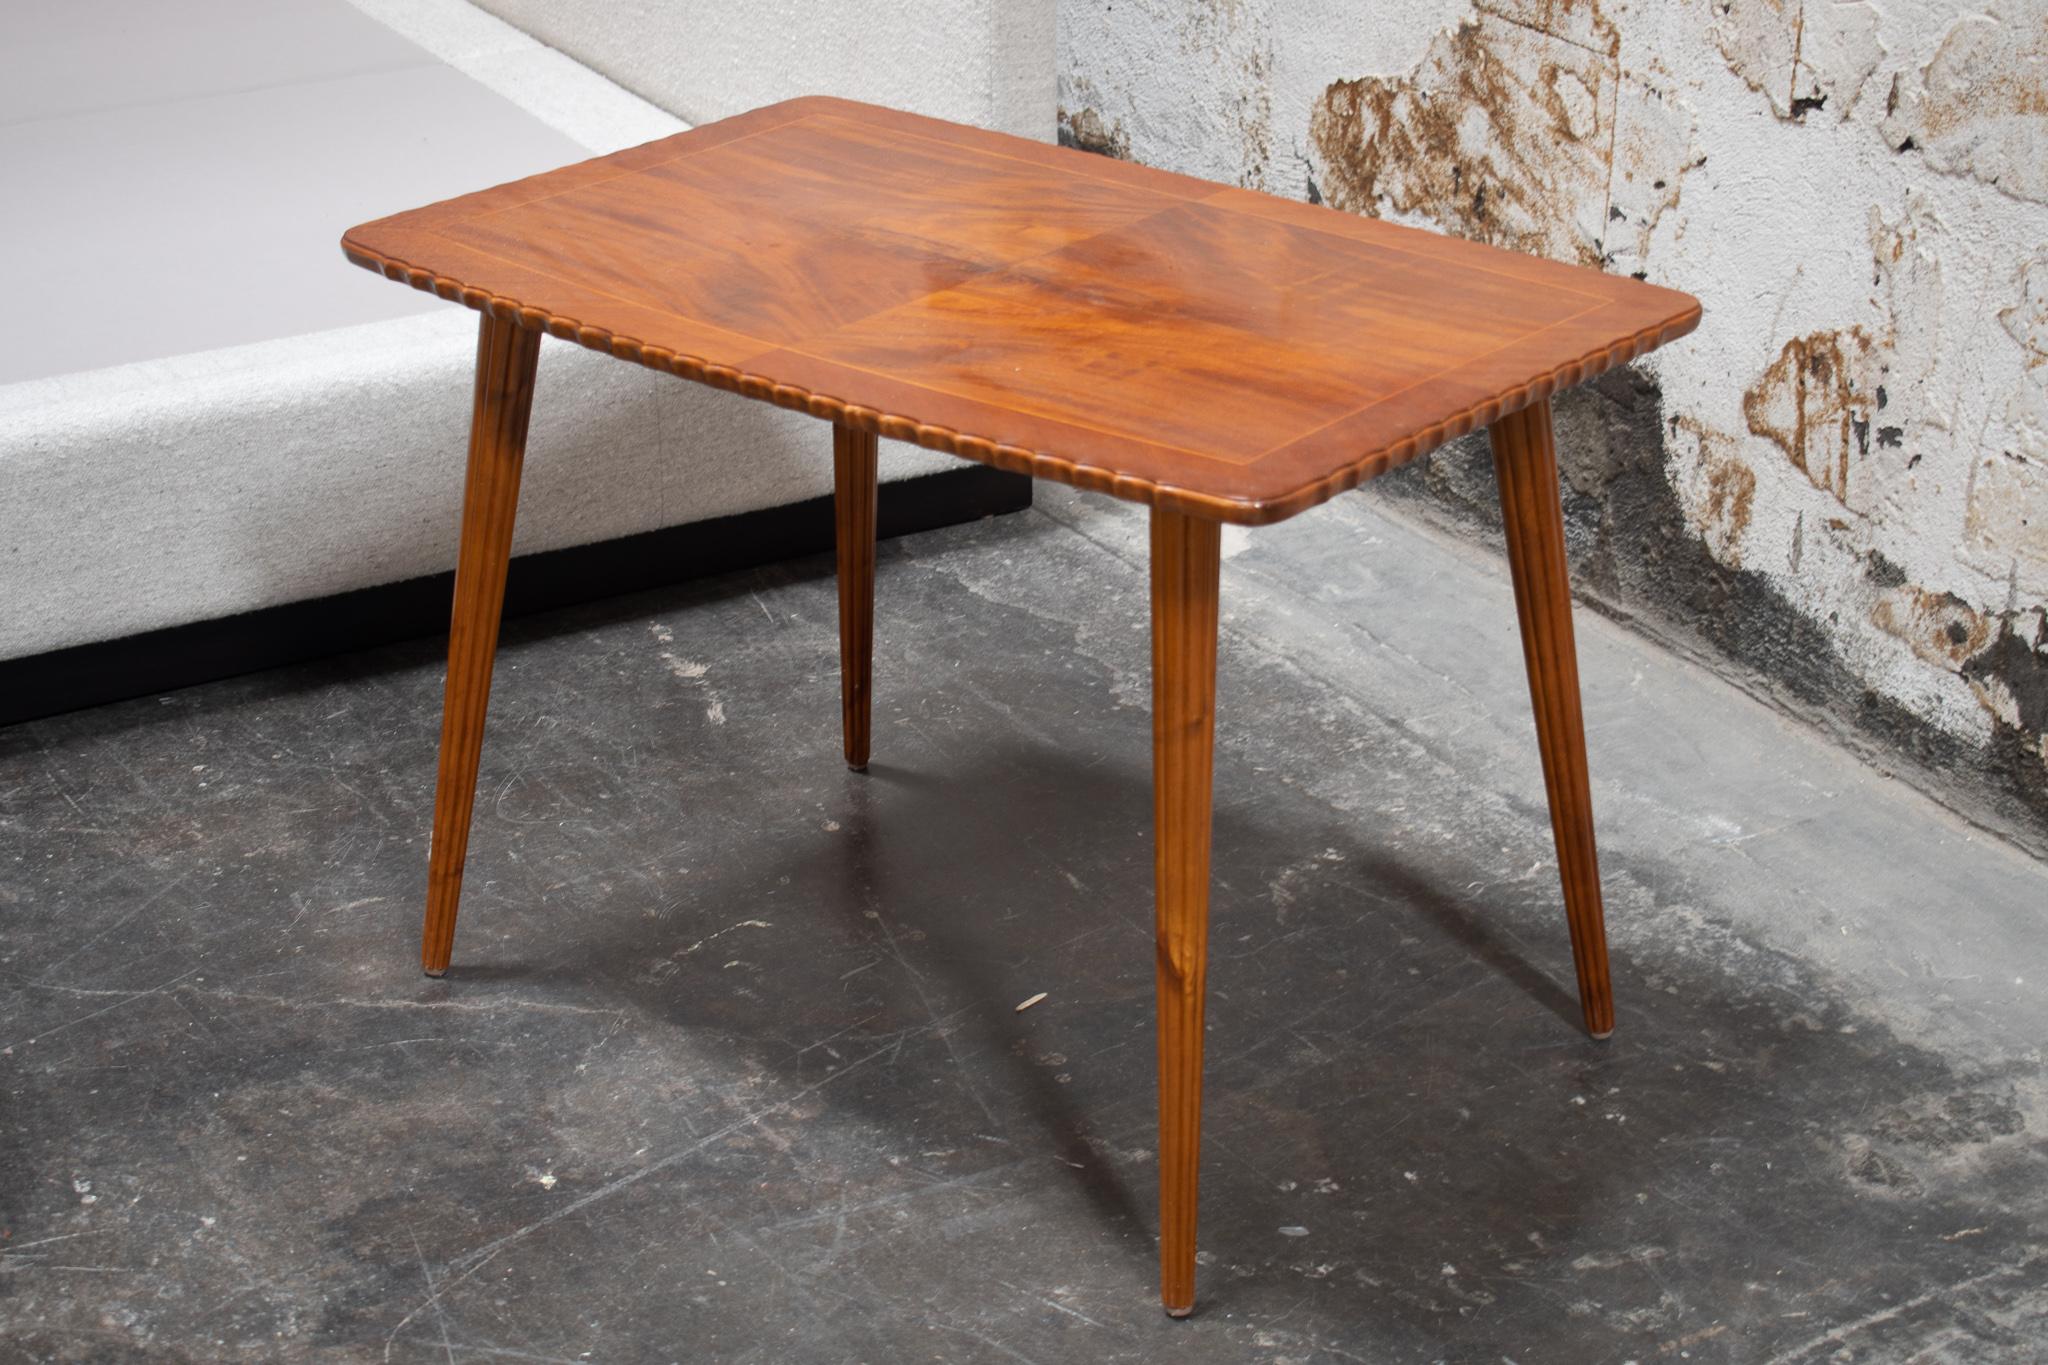 Midcentury Swedish coffee table made of crotch mahogany. Beautiful fluted tabletop edge and reeded legs. Would also work well as a side or end table.